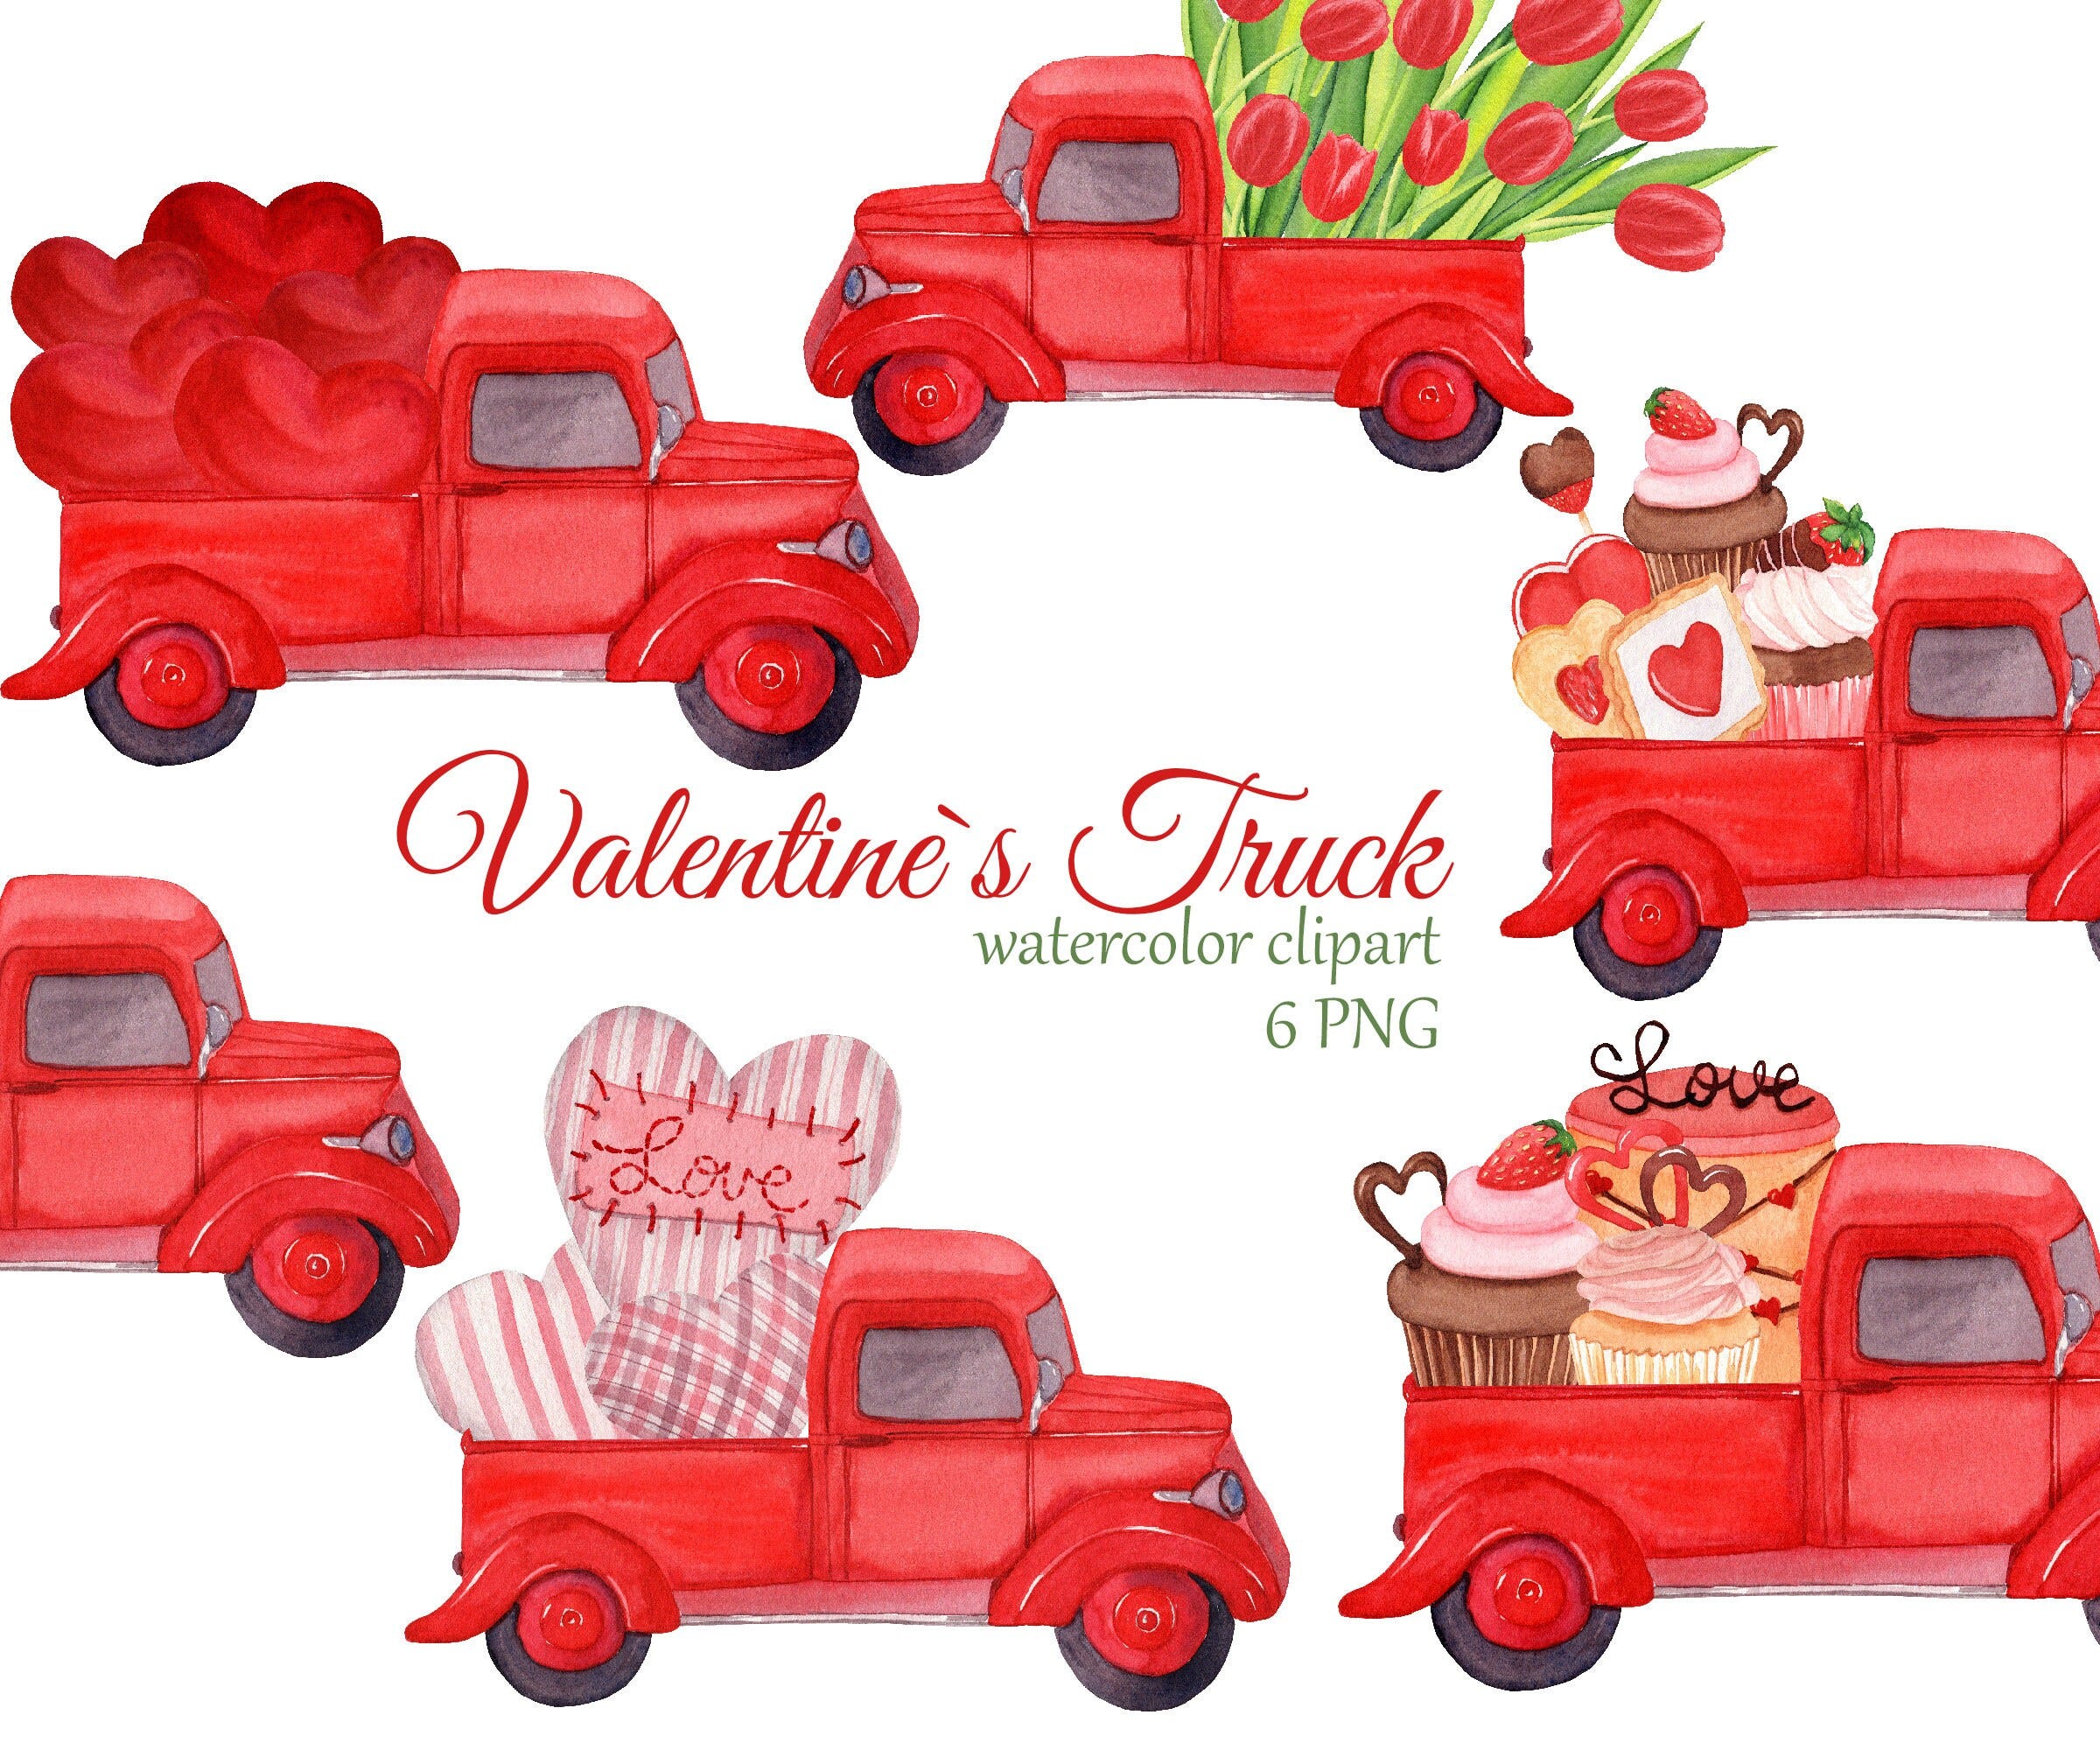 Red trucks with hearts, tulips and sweets. Valentine